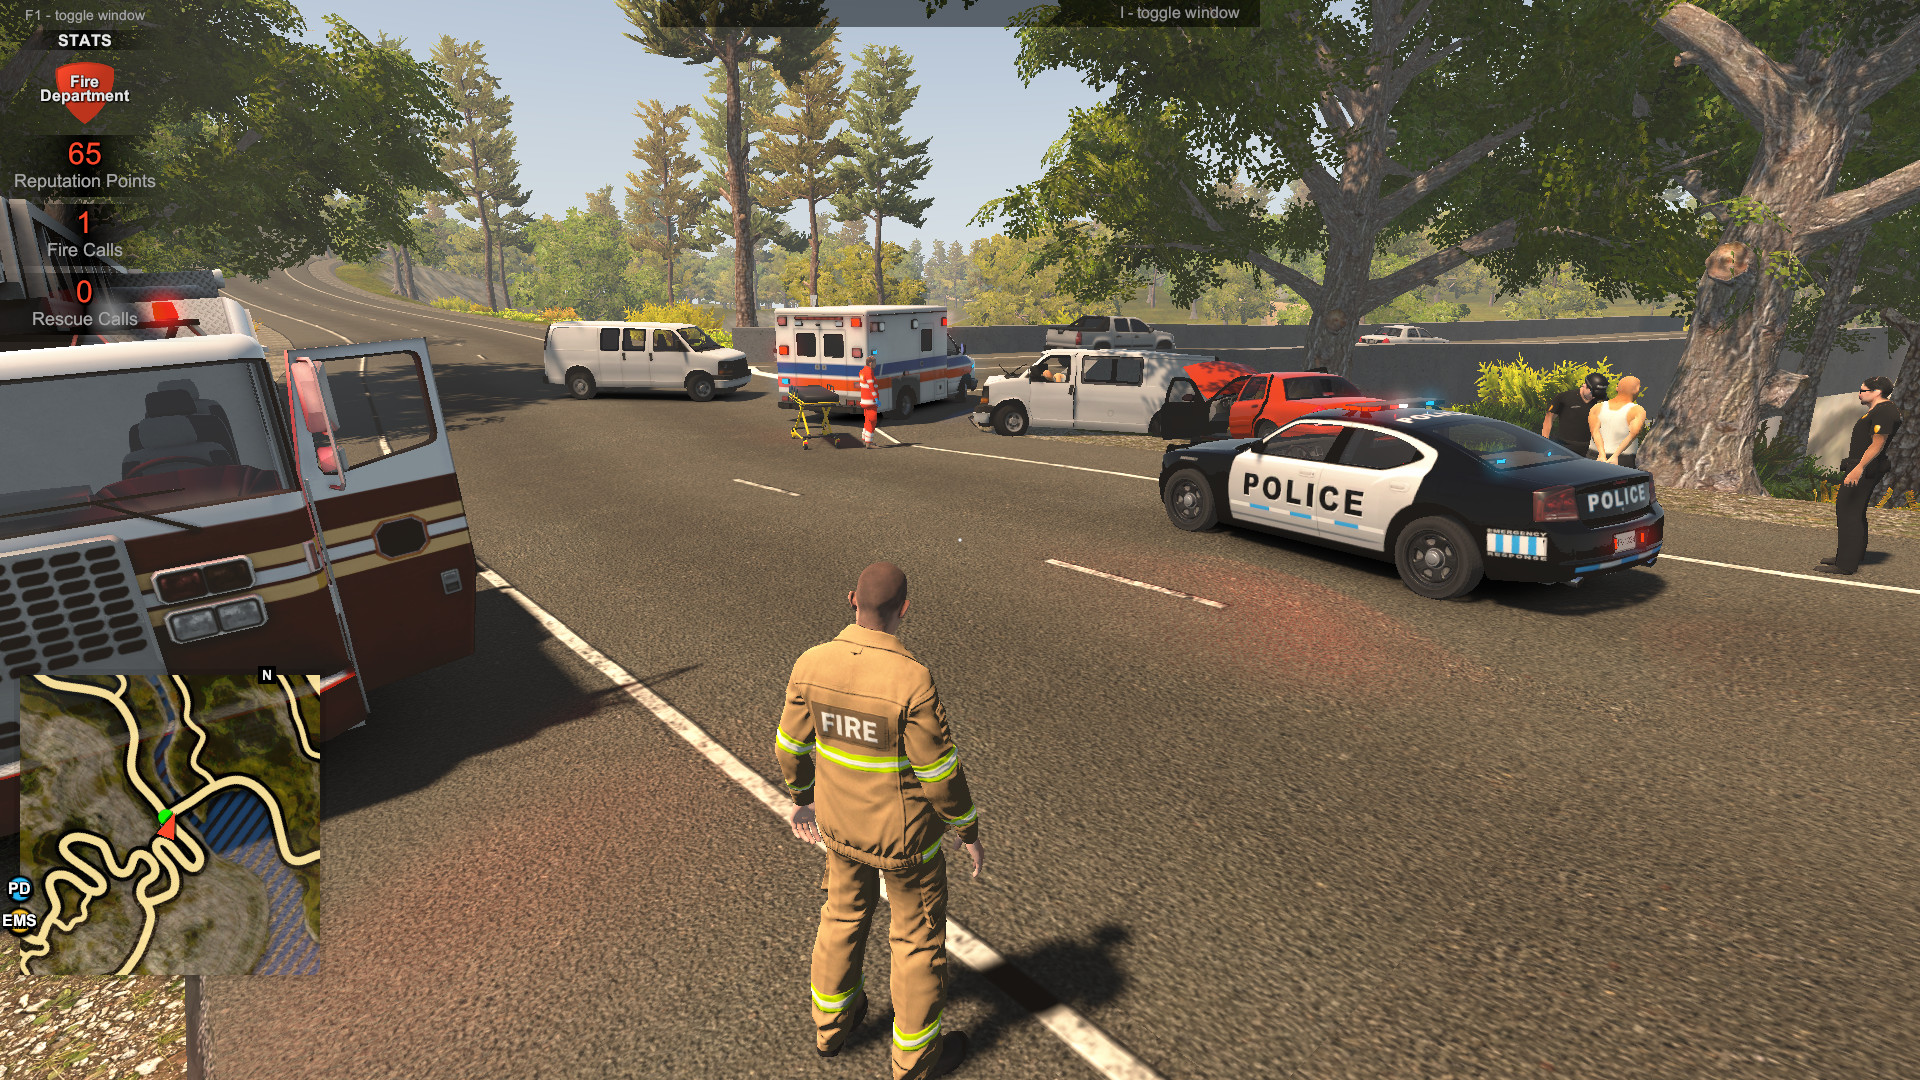 Save 25% on Flashing Lights - Police, Firefighting, Emergency Services  Simulator on Steam